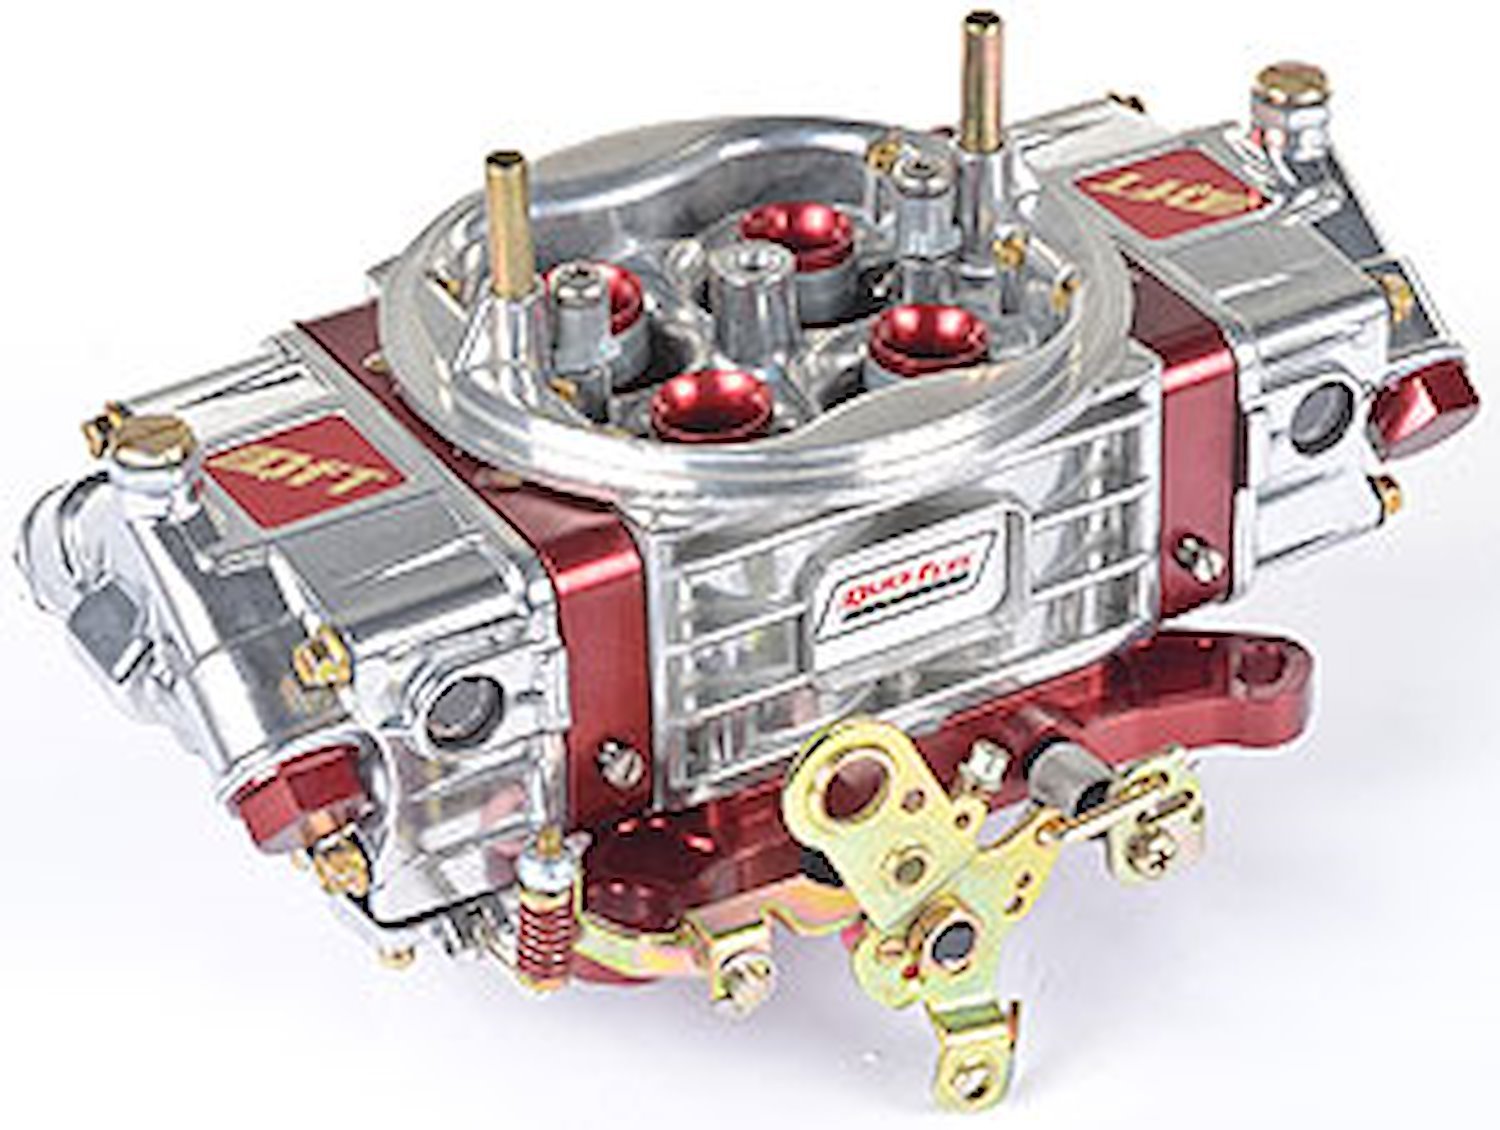 Q-Series 850cfm Drag Race Carb Calibrated for blow-through supercharger applications